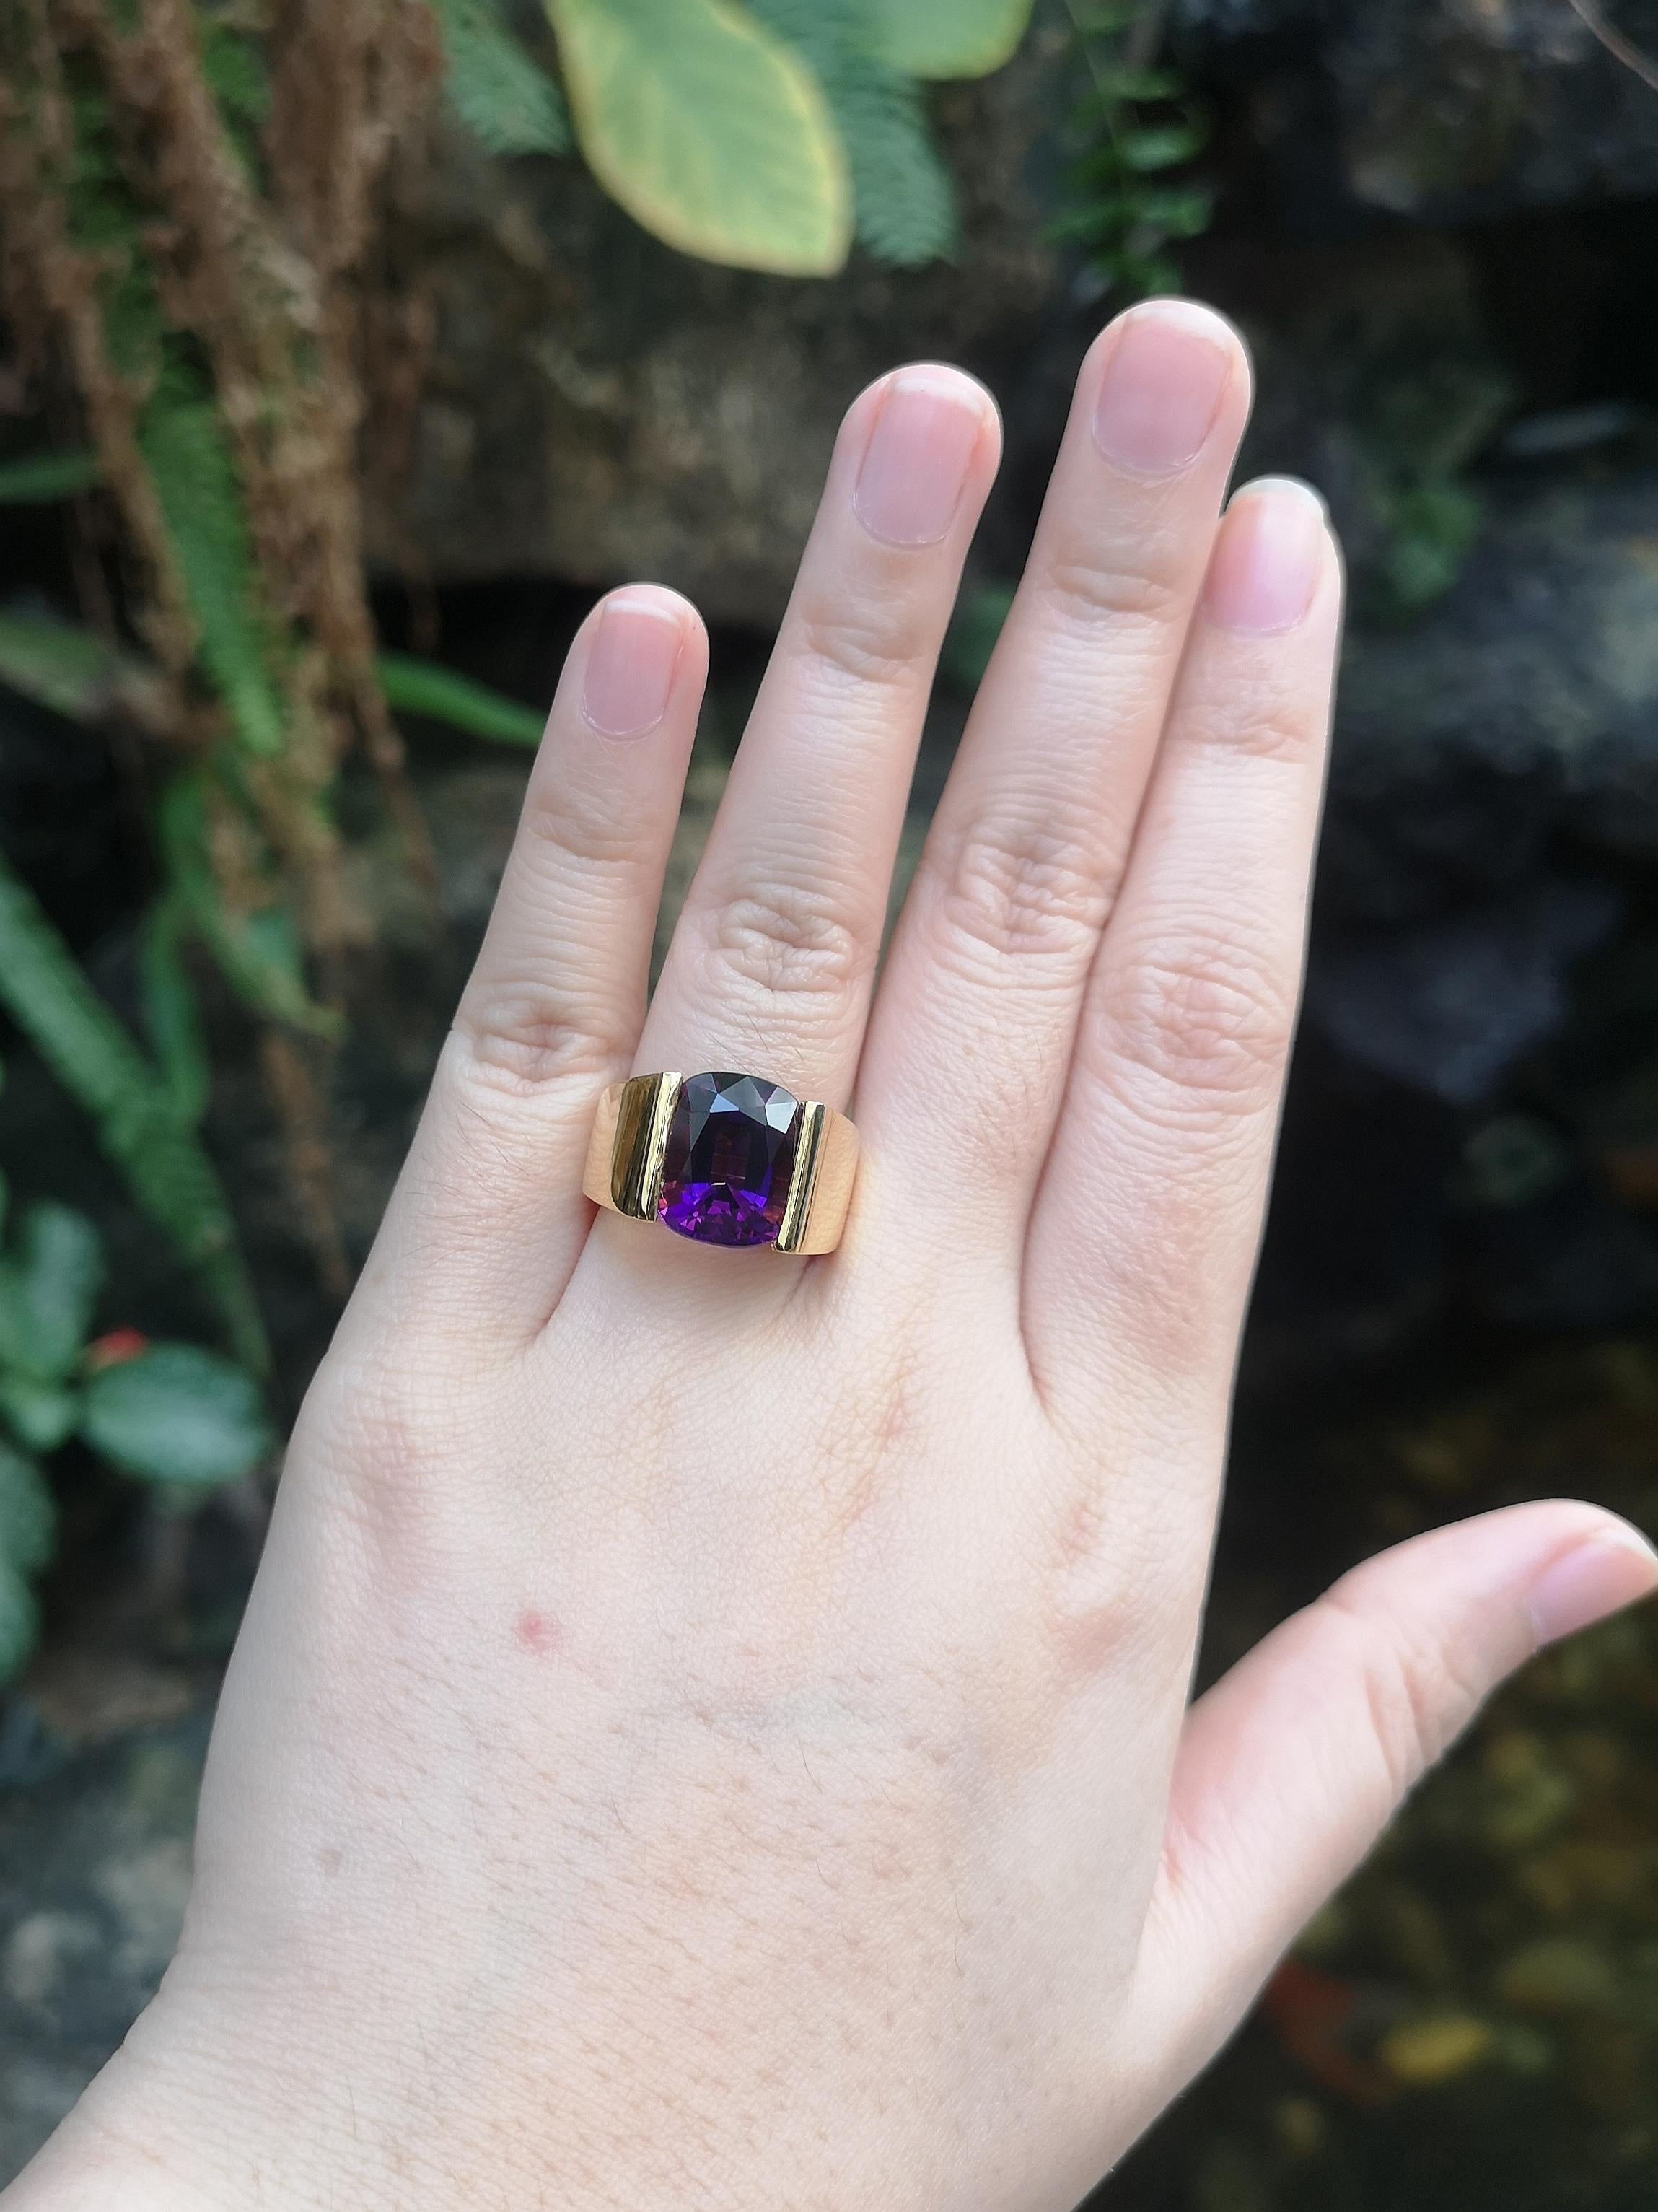 Amethyst 7.76 carats with Brown Diamond 0.44 carat Ring set in 18 Karat Gold Settings

Width:  1.3 cm 
Length: 1.3 cm
Ring Size: 55
Total Weight: 21.9 grams

